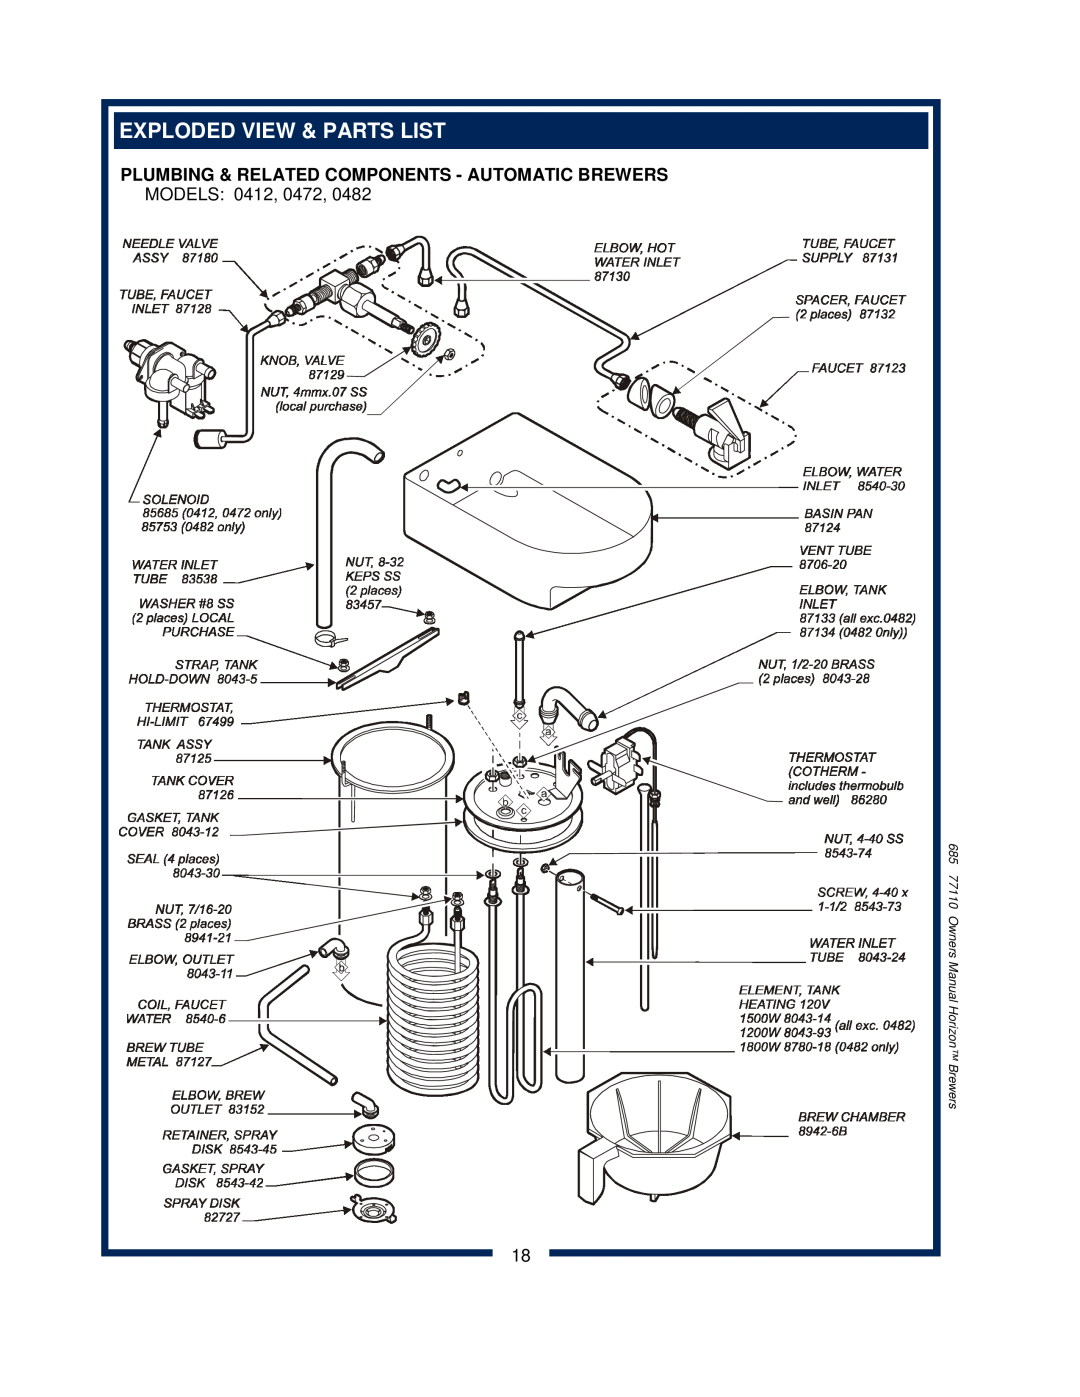 Bloomfield 0412, 0443, 0471, 0482, 0472 Exploded View & Parts List, Plumbing & Related Components - Automatic Brewers, Models 